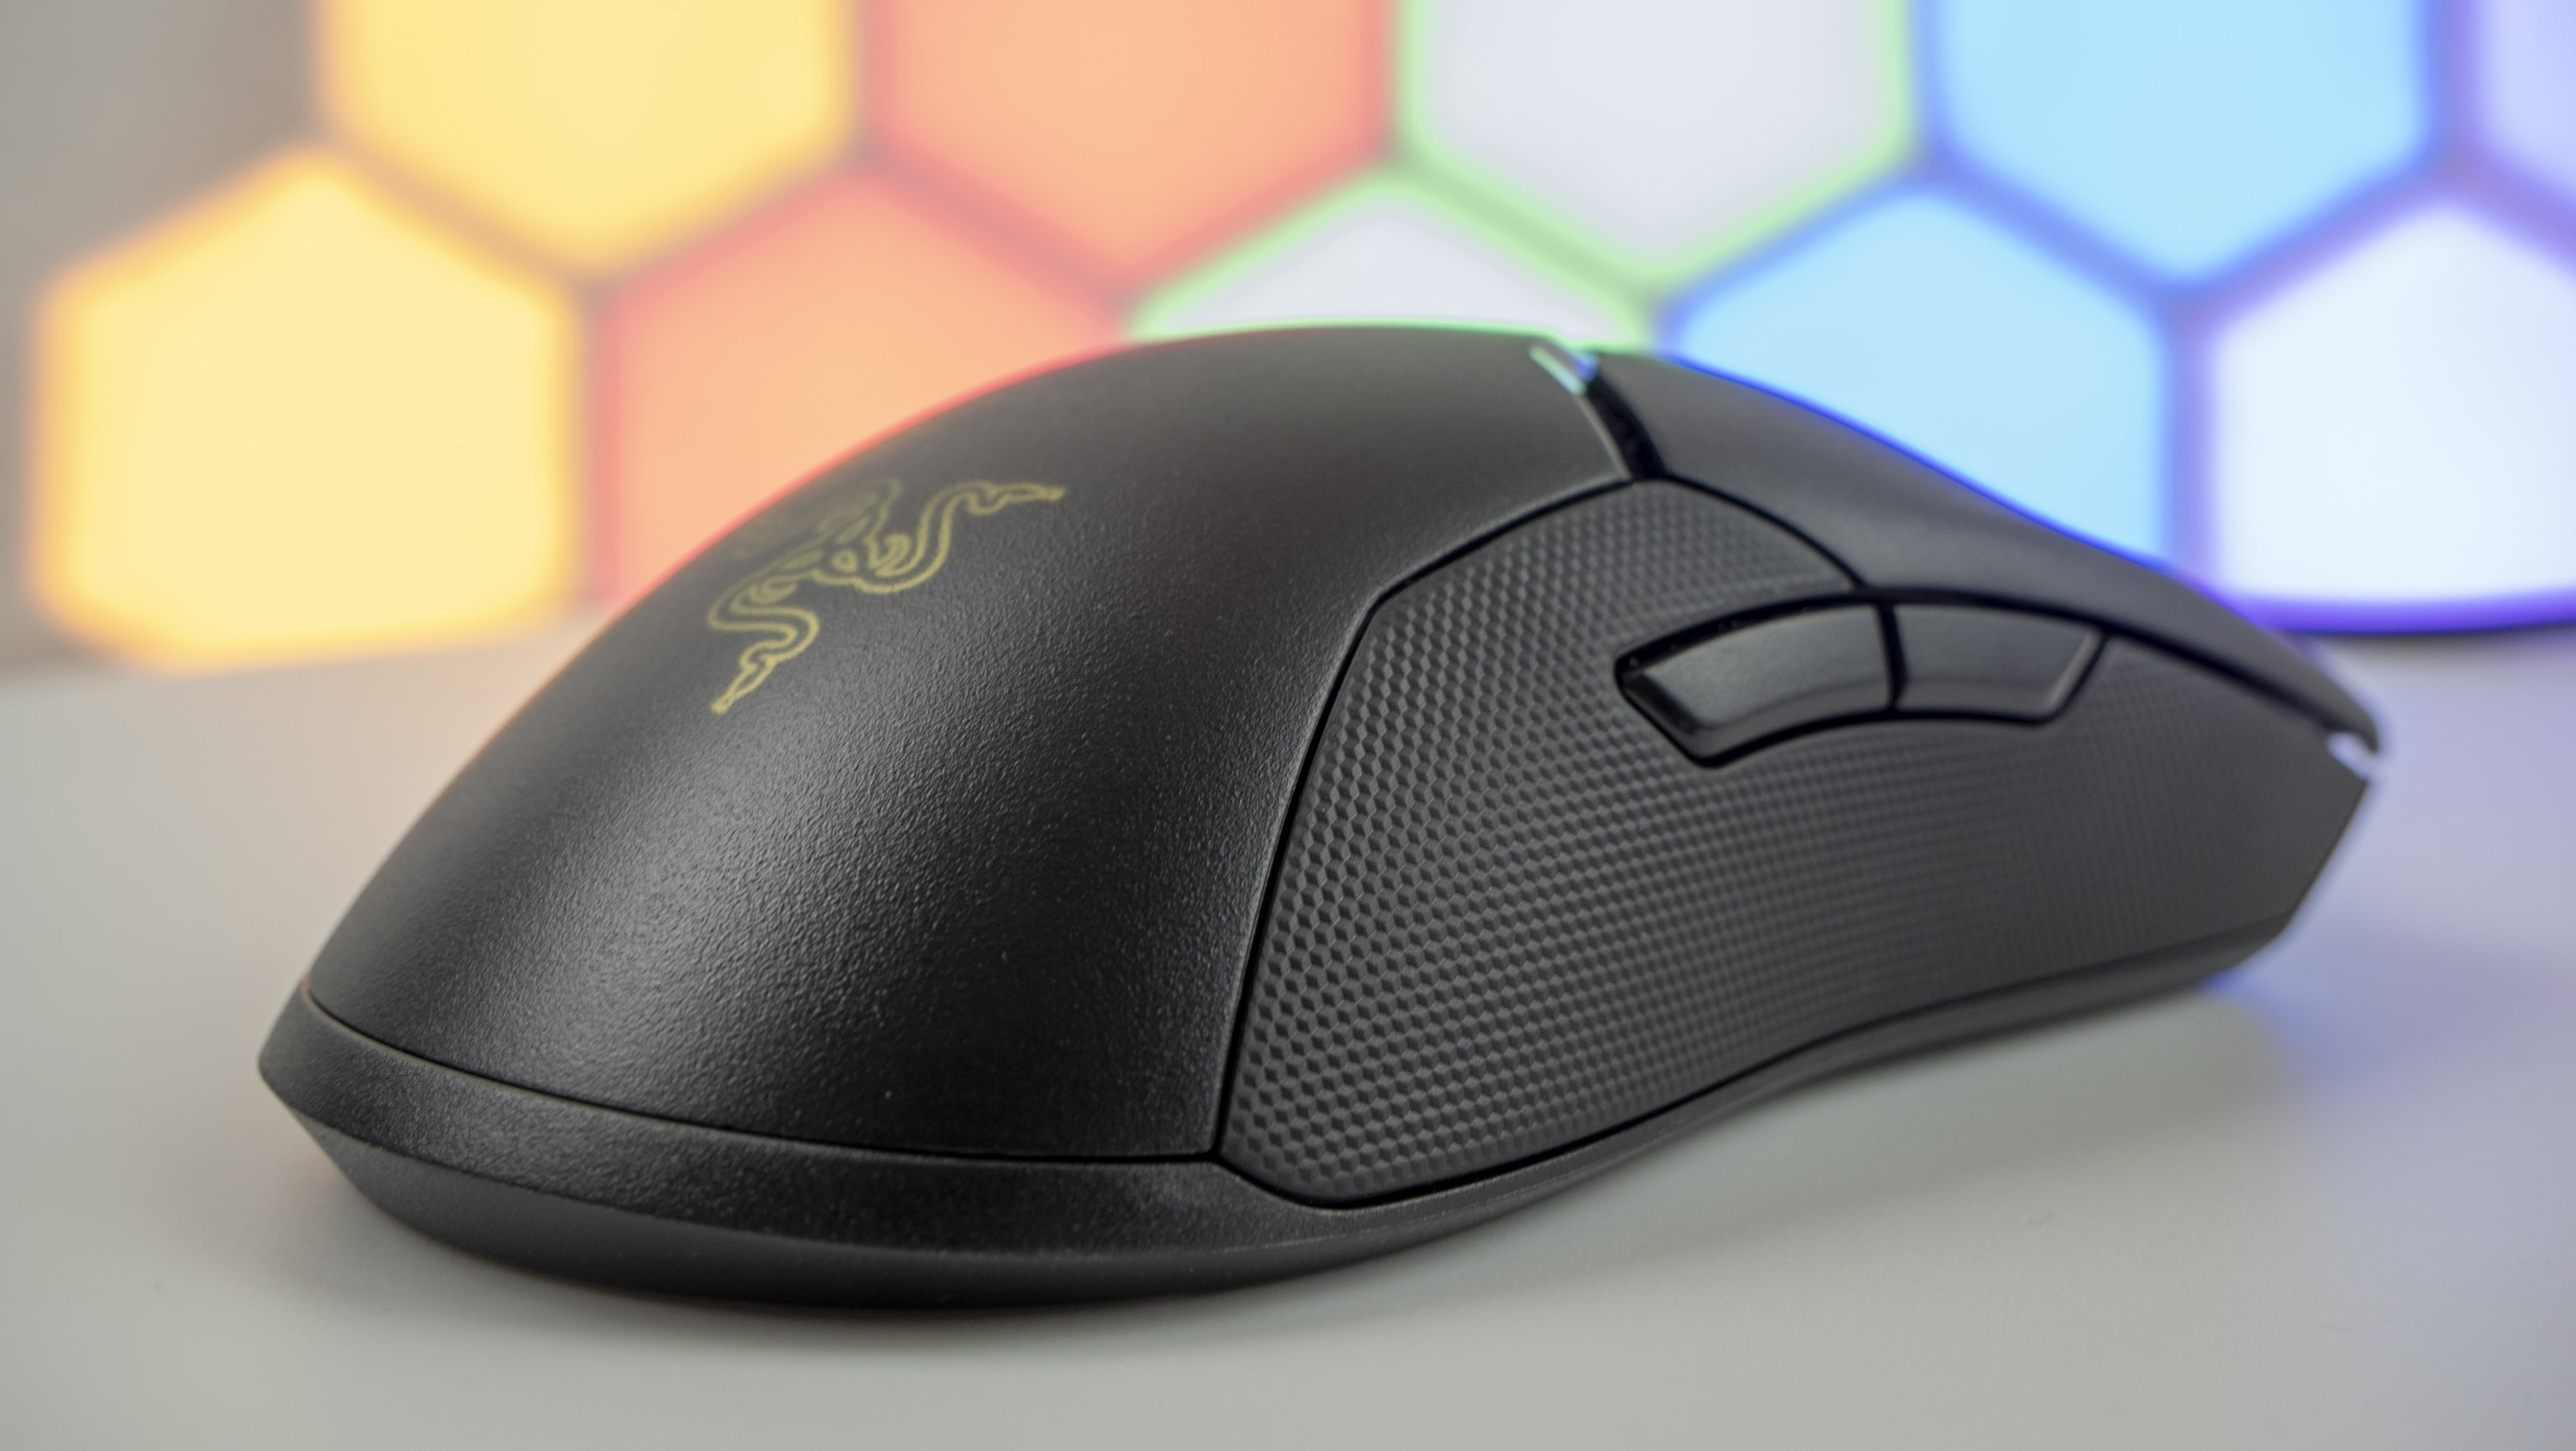 Razer Viper 8k in test: The world's first mouse with 8,000 Hz